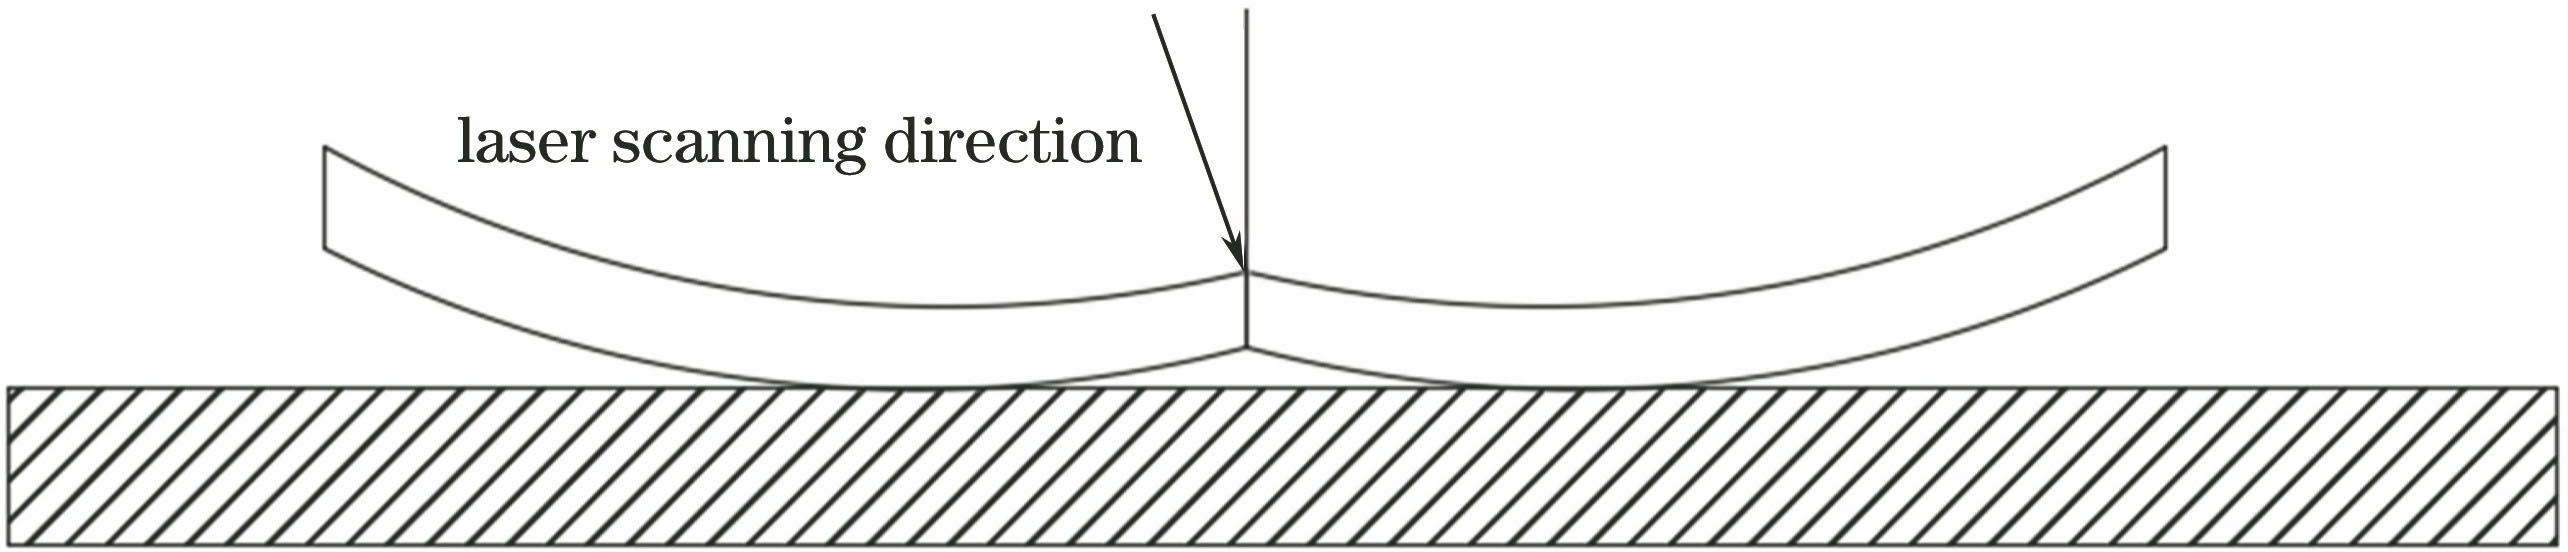 Schematic of laser beam deflection at welding speed of 15 mm/s